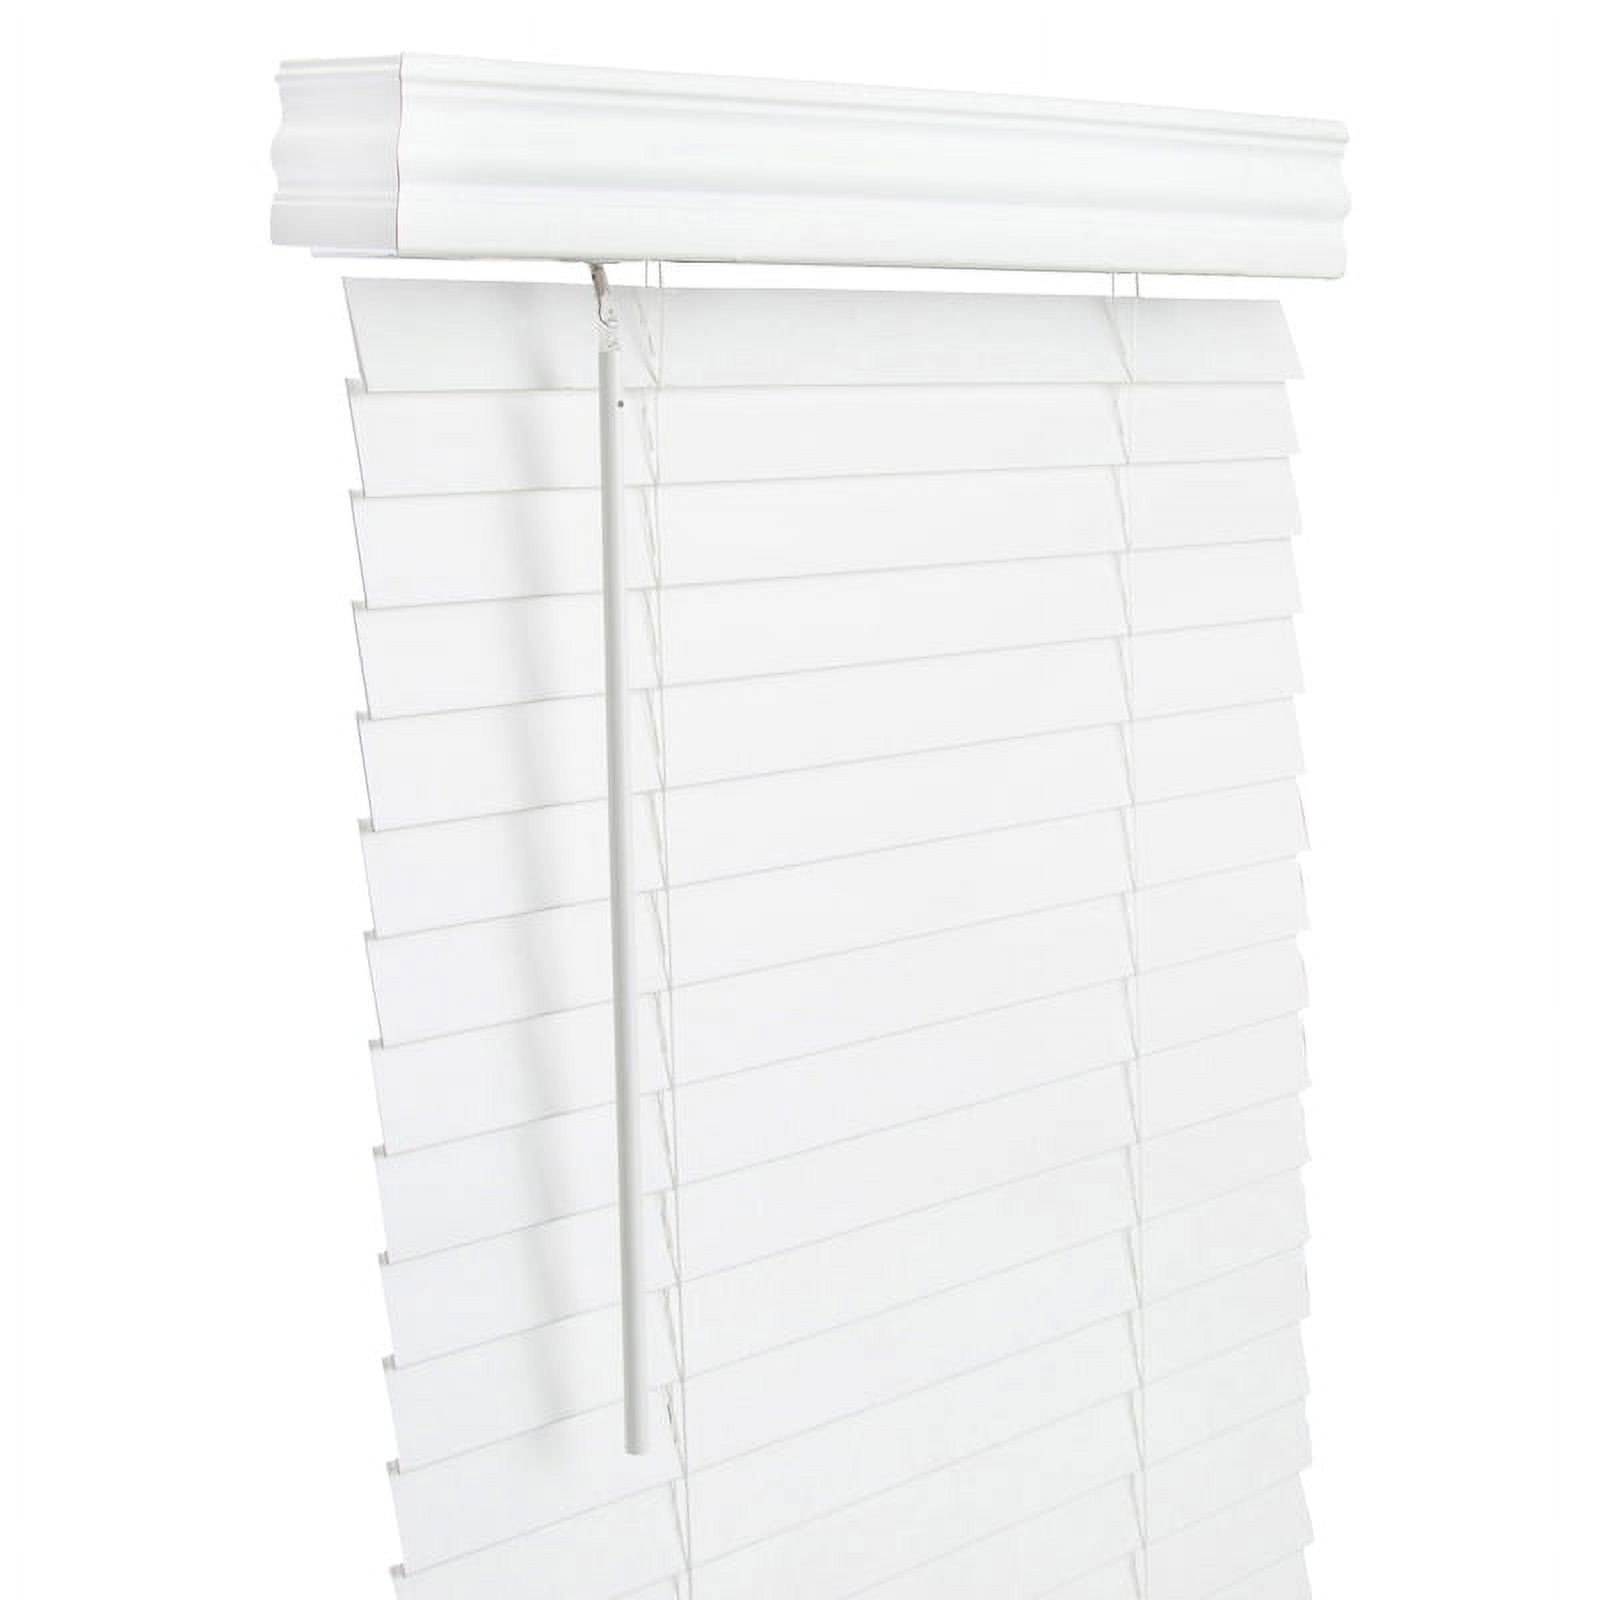 5005718 Faux Wood 2 In. Mini-blinds, 29 X 60 In. White Cordless